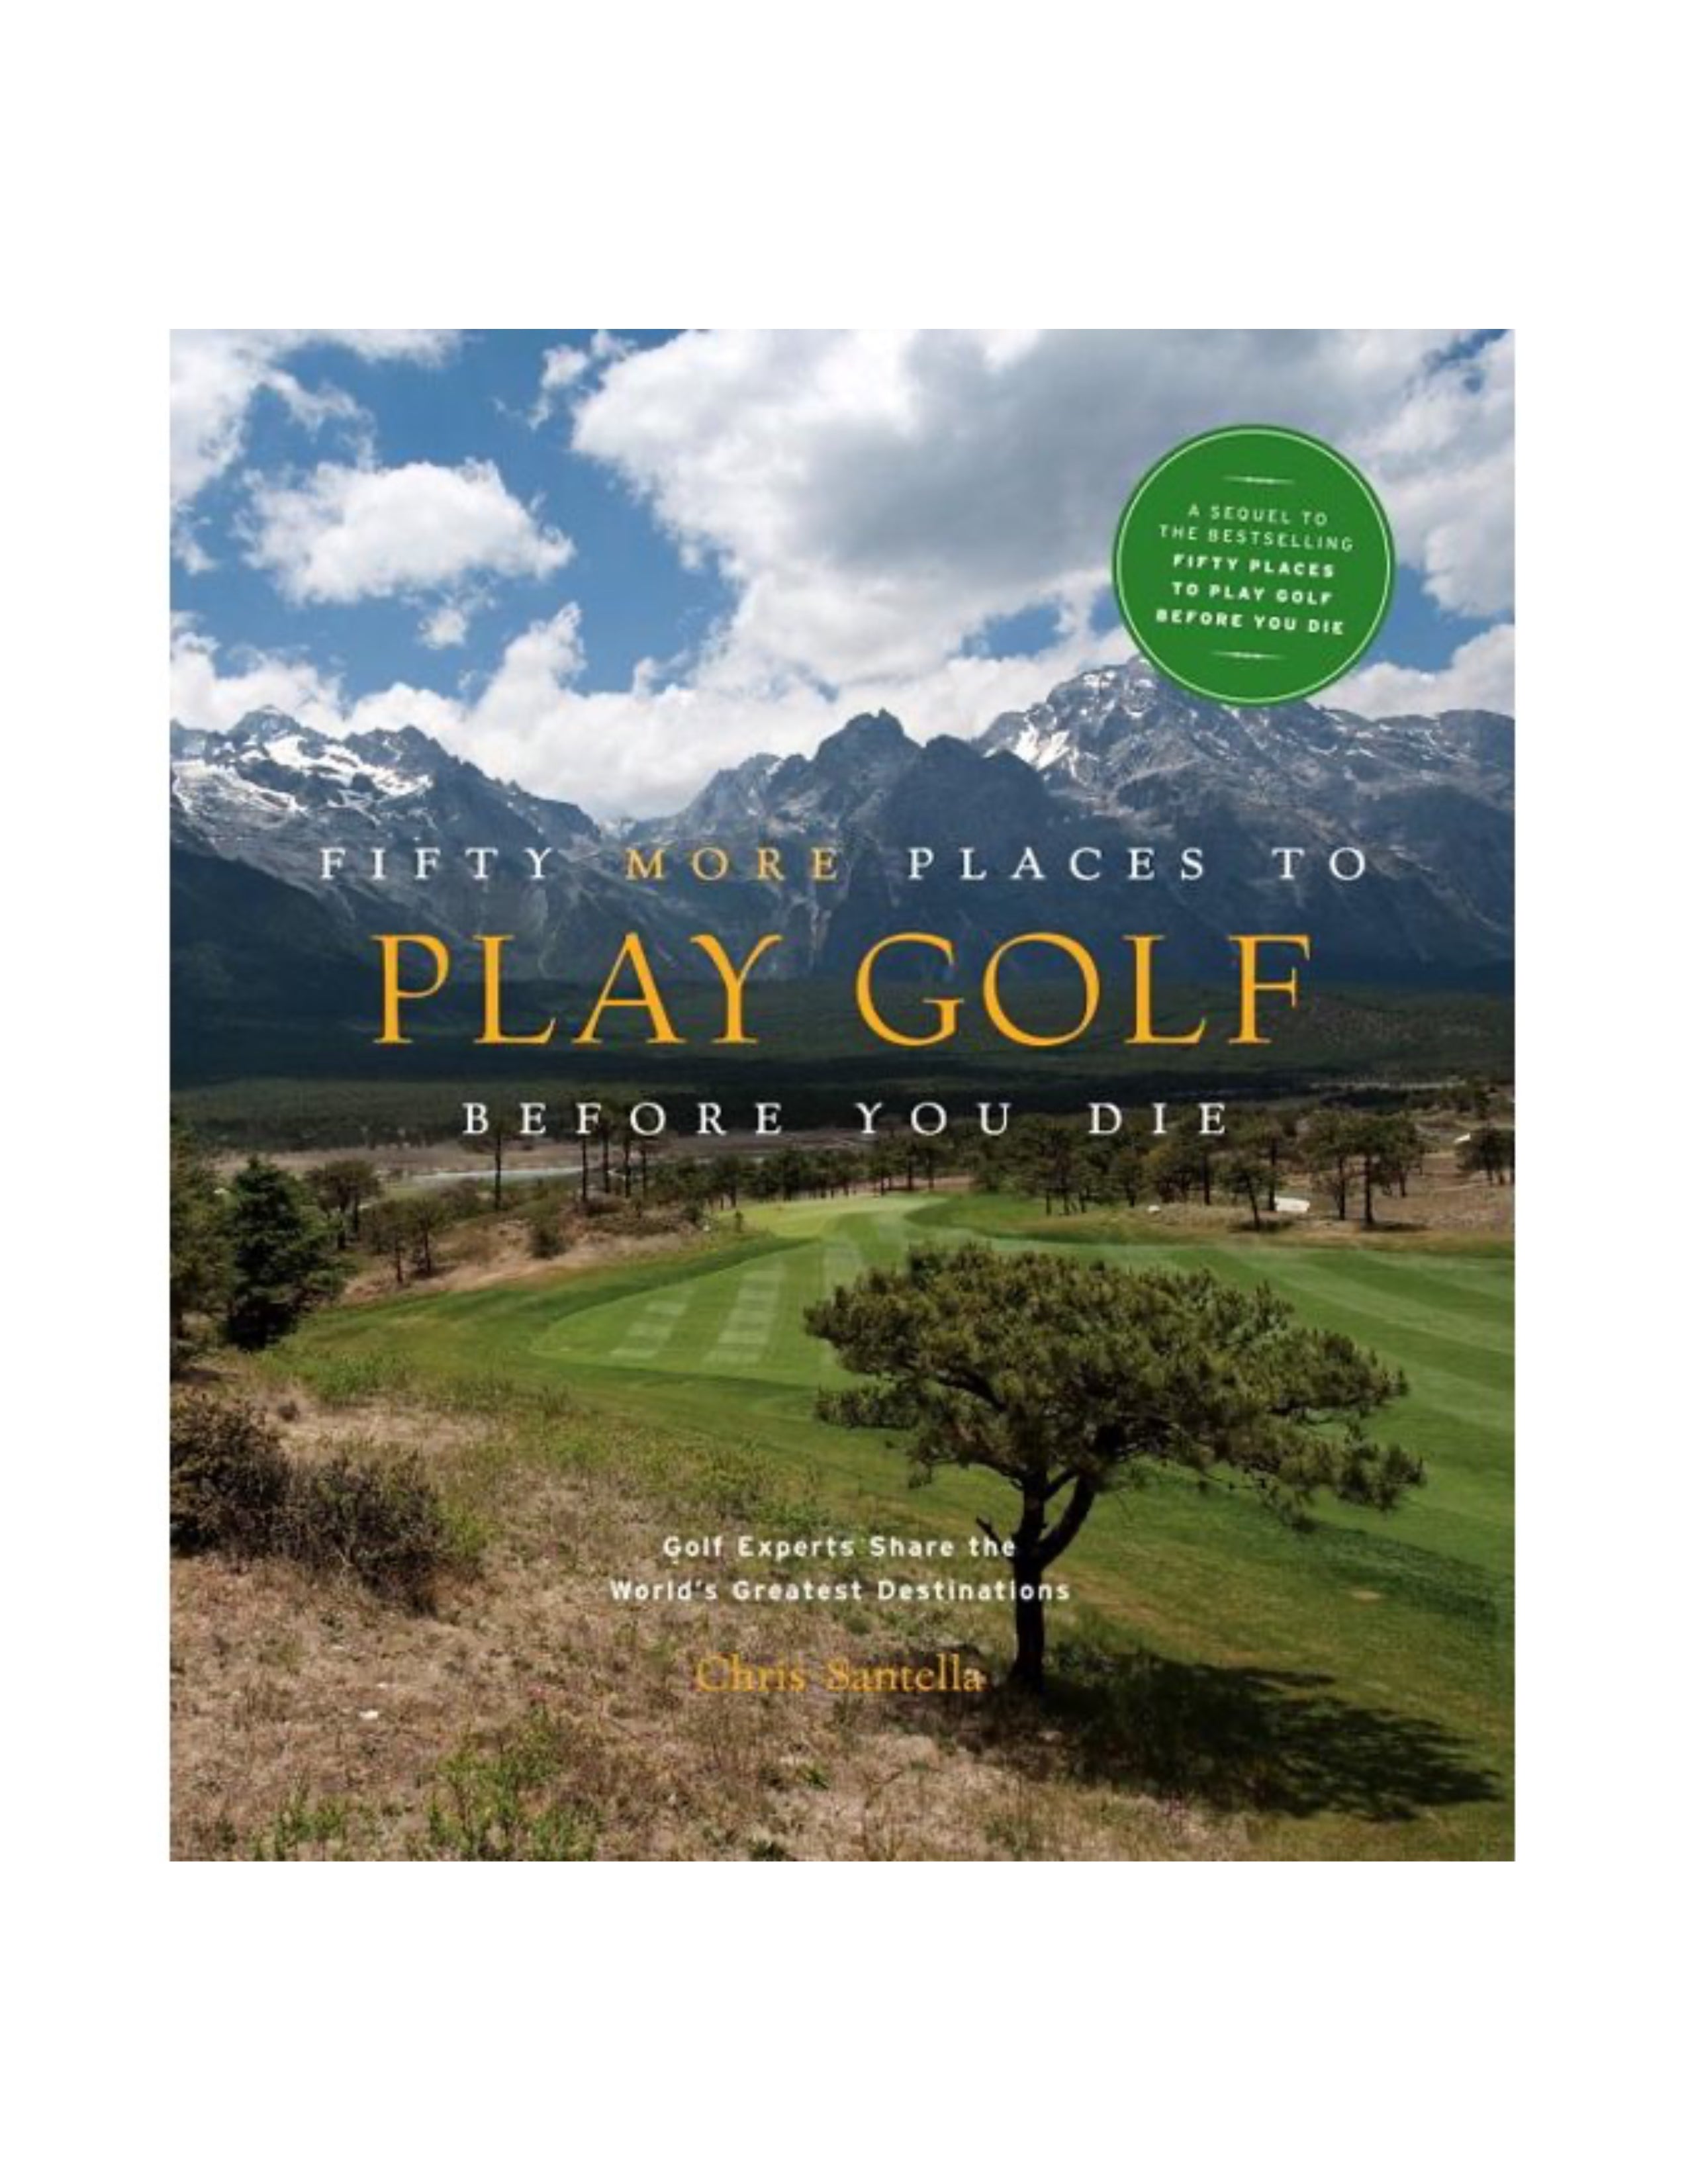 Fifty Places More to Play Golf Before You Die